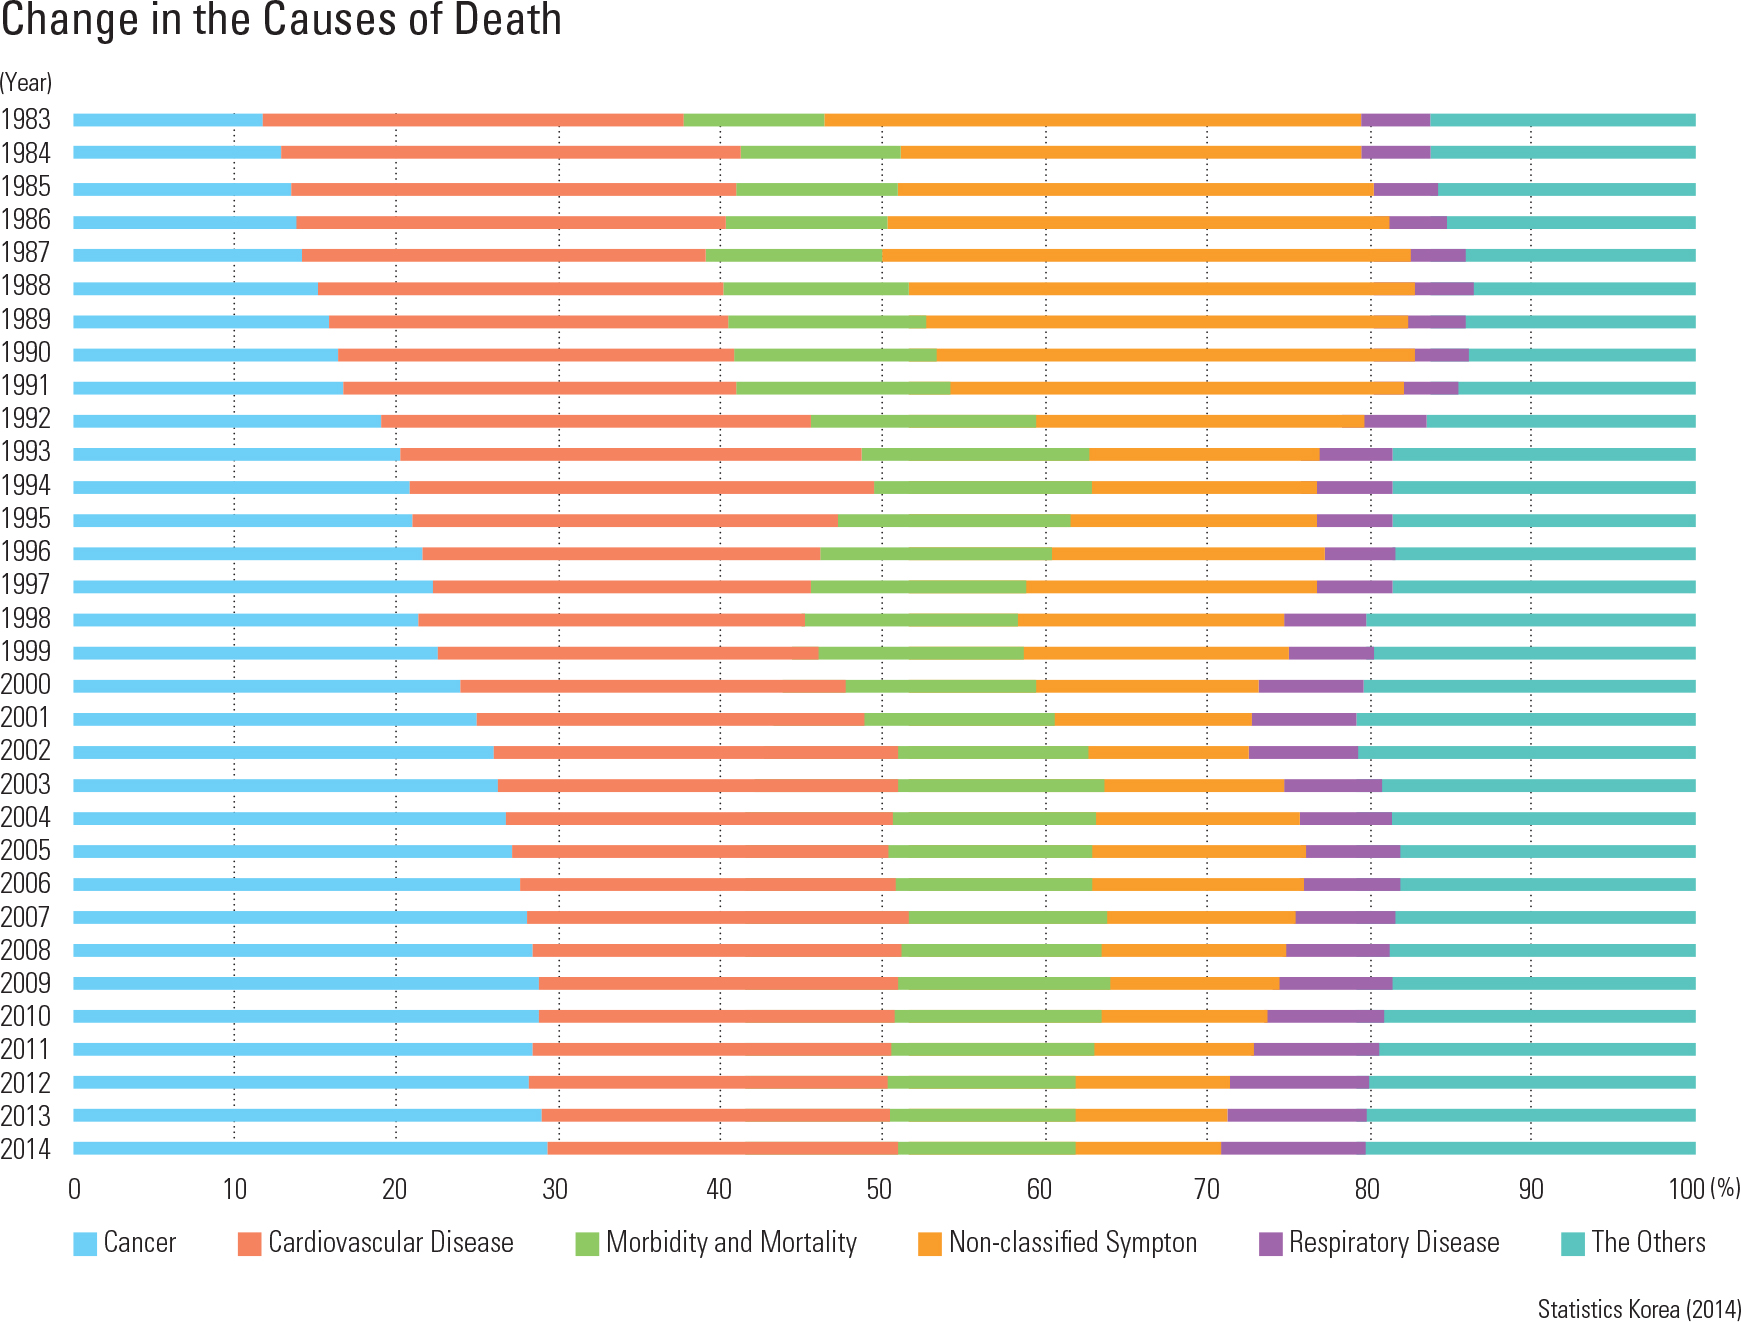 Change in the Causes of Death<p class="oz_zoom" zimg="http://imagedata.cafe24.com/us_3/us3_232-1_2.jpg"><span style="font-family:Nanum Myeongjo;"><span style="font-size:18px;"><span class="label label-danger">UPDATE DATA</span></span></p>